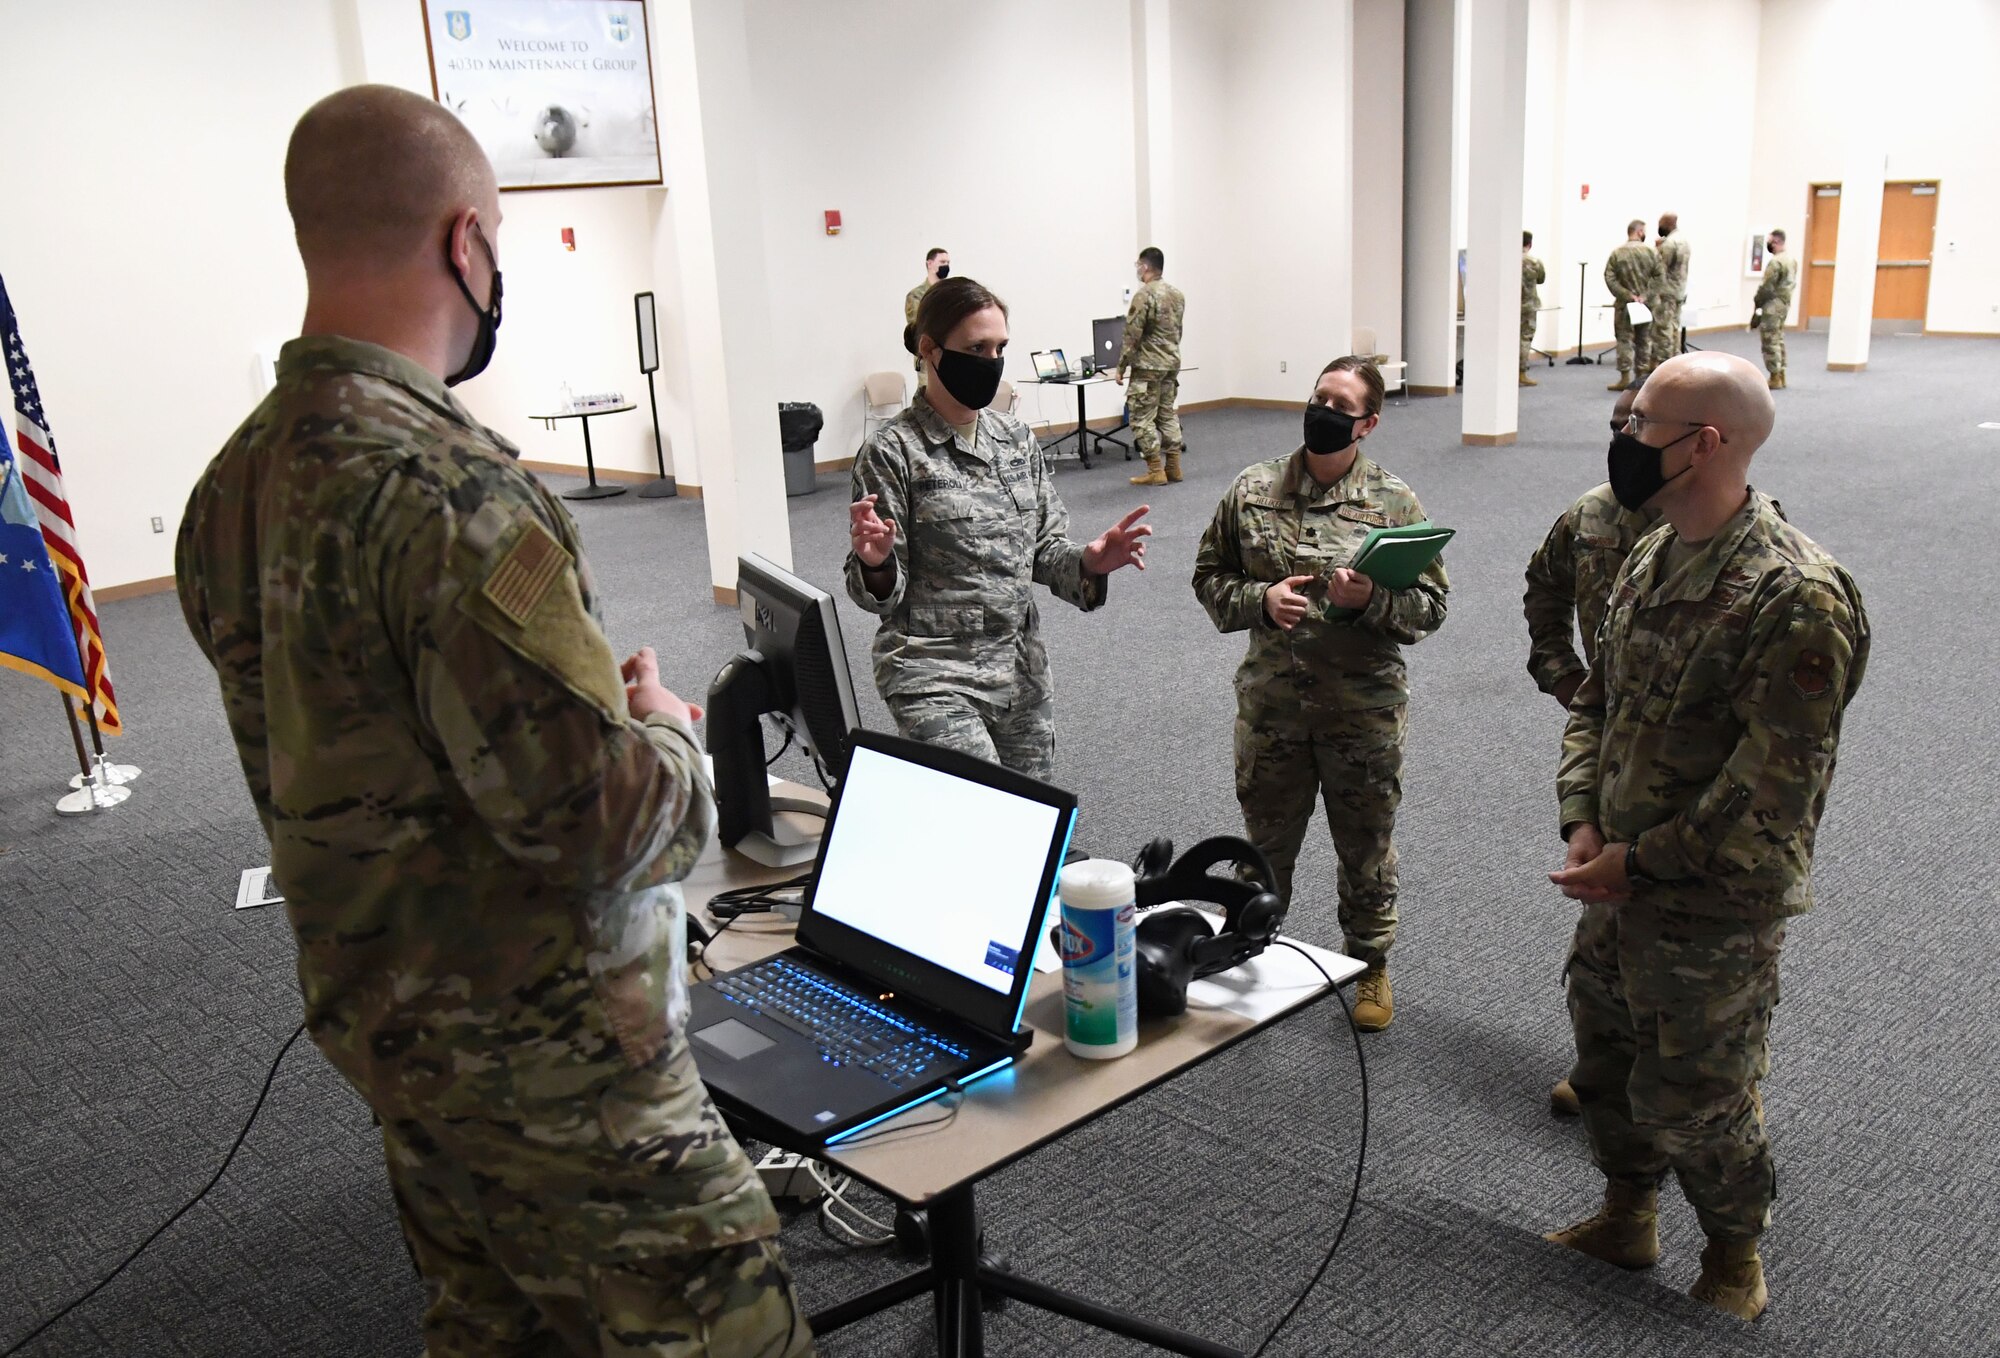 U.S. Air Force Master Sgt. Carolann Peteroli, 335th Training Squadron curriculum developer, explains the capabilities of the weather course virtual reality lab to Col. Chance Geray, 81st Training Group commander, during the 81st TRG Mock Tech Expo inside the Roberts Consolidated Aircraft Maintenance Facility at Keesler Air Force Base, Mississippi, Jan. 27, 2021. The 81st TRG level event was designed to prepare Keesler's nine innovation projects for the Air Education and Training Command level exposition. (U.S. Air Force photo by Kemberly Groue)